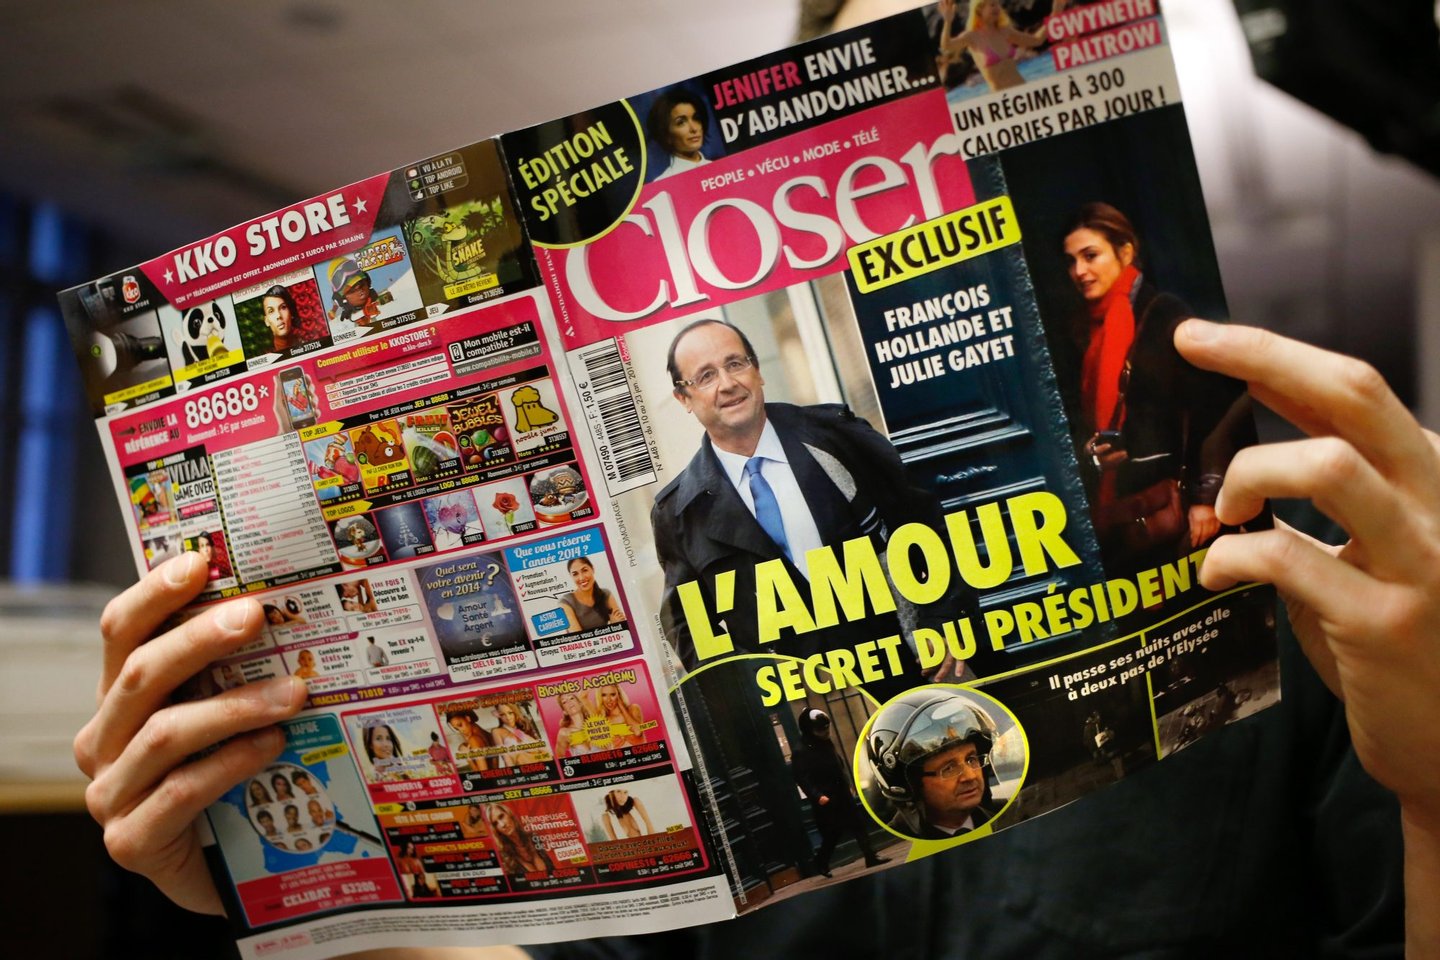 A man reads French magazine Closer, on January 10, 2014 in Paris. Closer said today President Francois Hollande was having an affair with actress Julie Gayet, backing its claim with photographs after months of swirling rumours. AFP PHOTO THOMAS COEX (Photo credit should read THOMAS COEX/AFP/Getty Images)